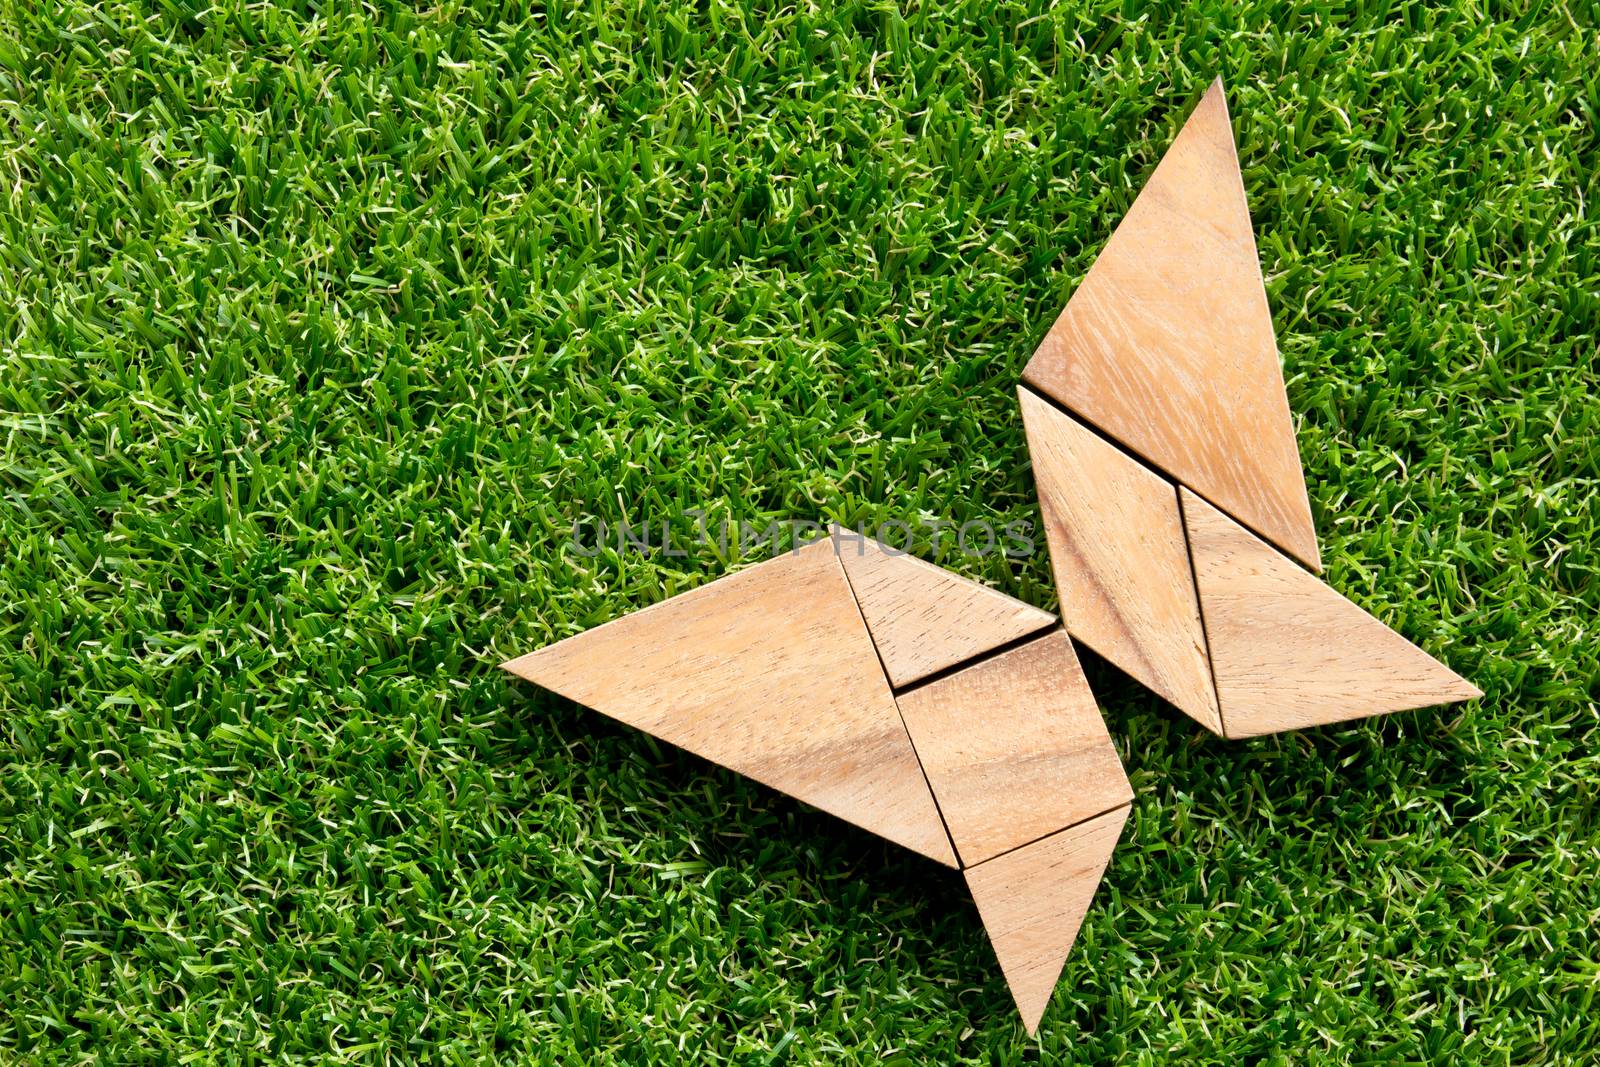 Wooden tangram puzzle in flying butterfly shape on green grass background